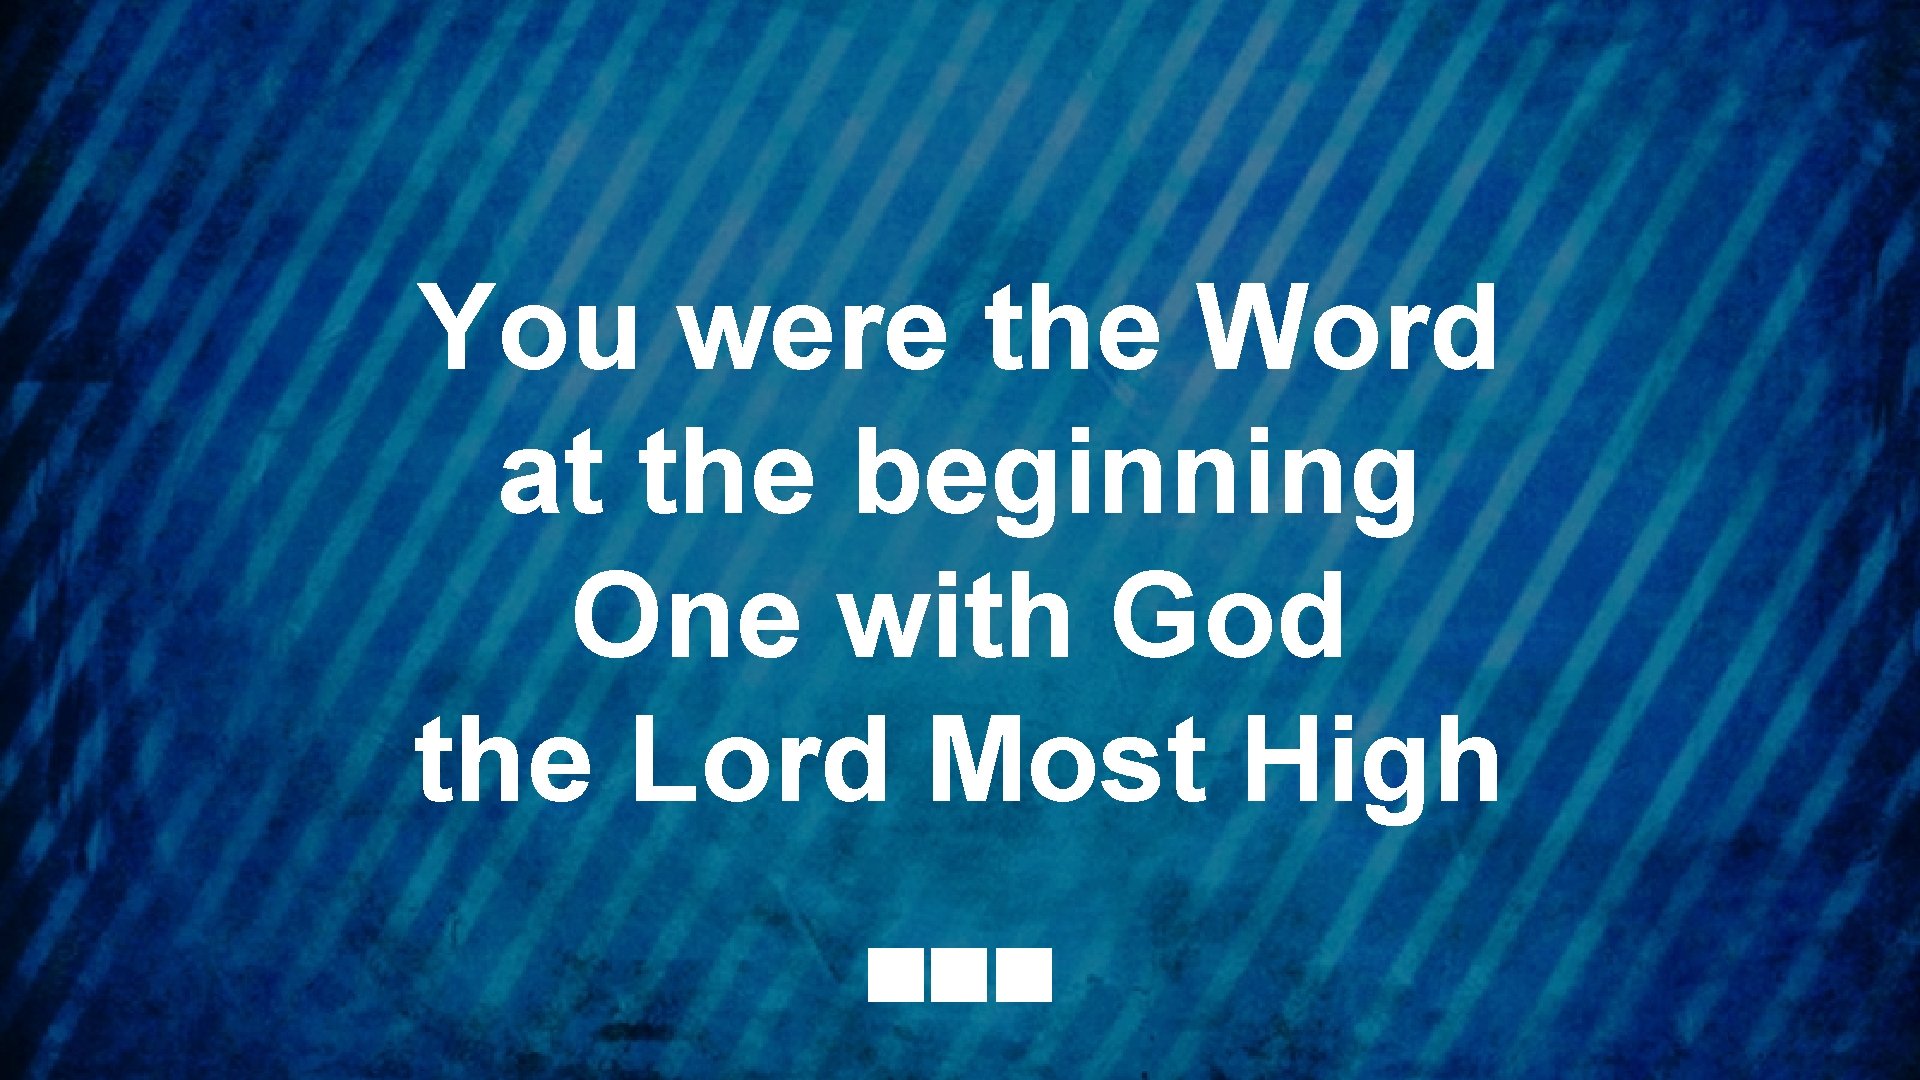 You were the Word at the beginning One with God the Lord Most High